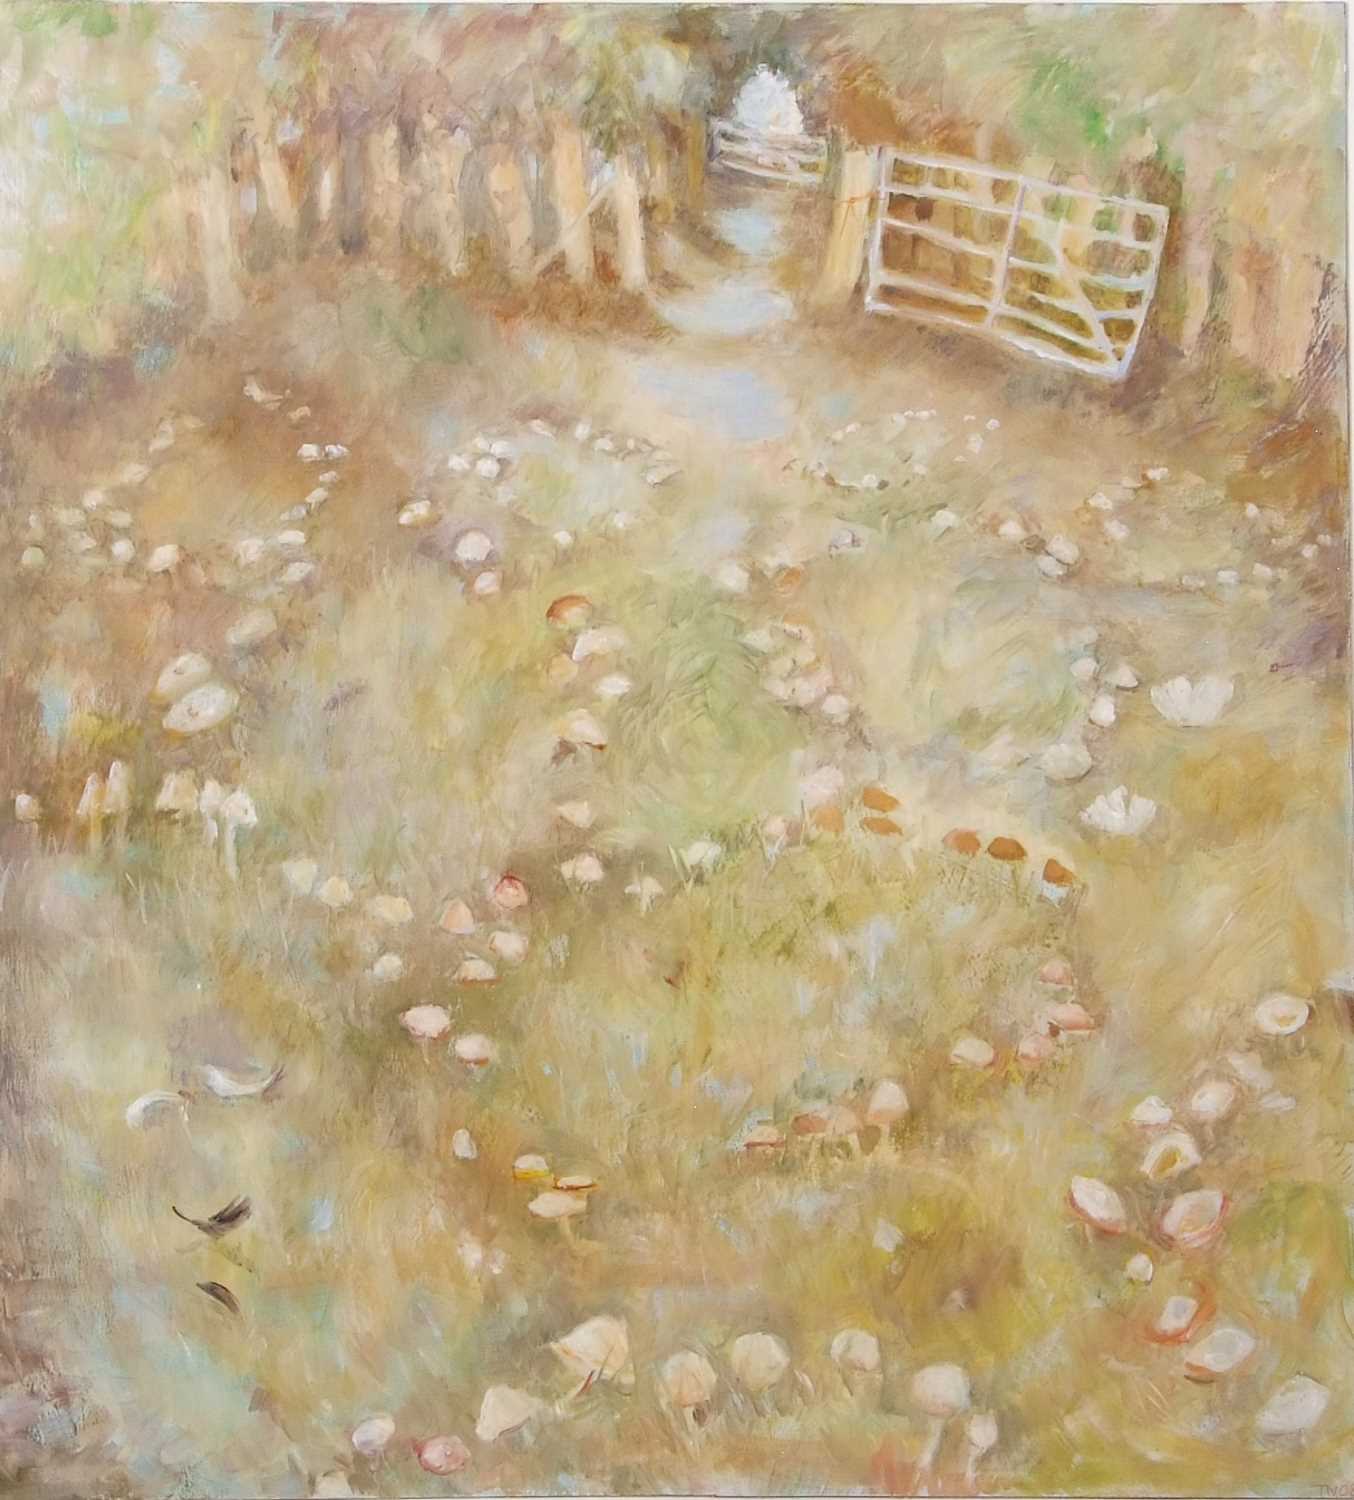 Tessa Newcomb (b.1955), 'Fairy Rings at Bird Place', oil on board, signed and dated Sept '08, - Image 2 of 2